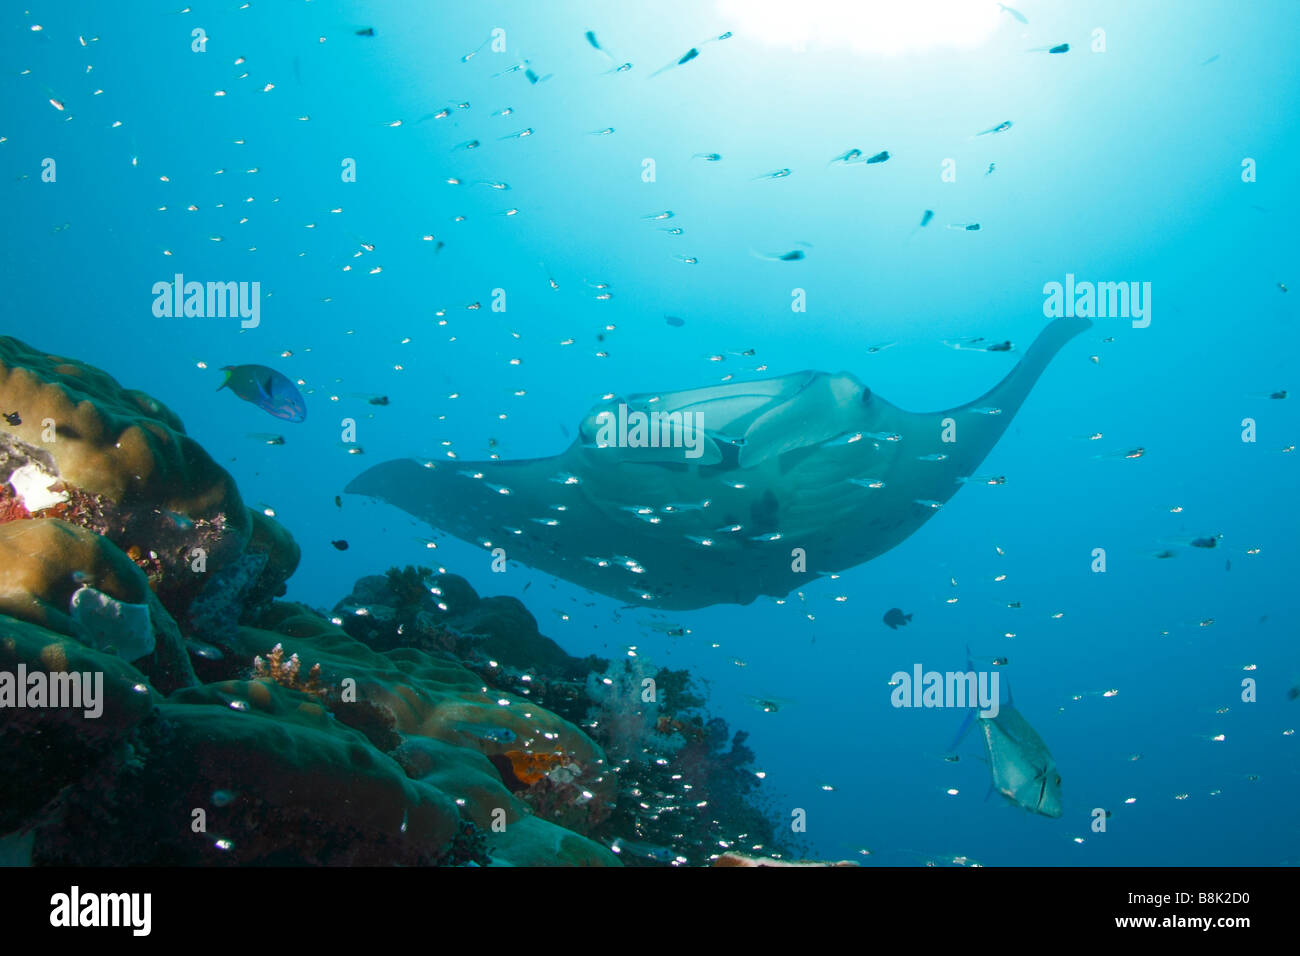 Manta ray approaching a colorful coral reef with school of glass fishes and reef fish sihouettes with the sun in background Stock Photo